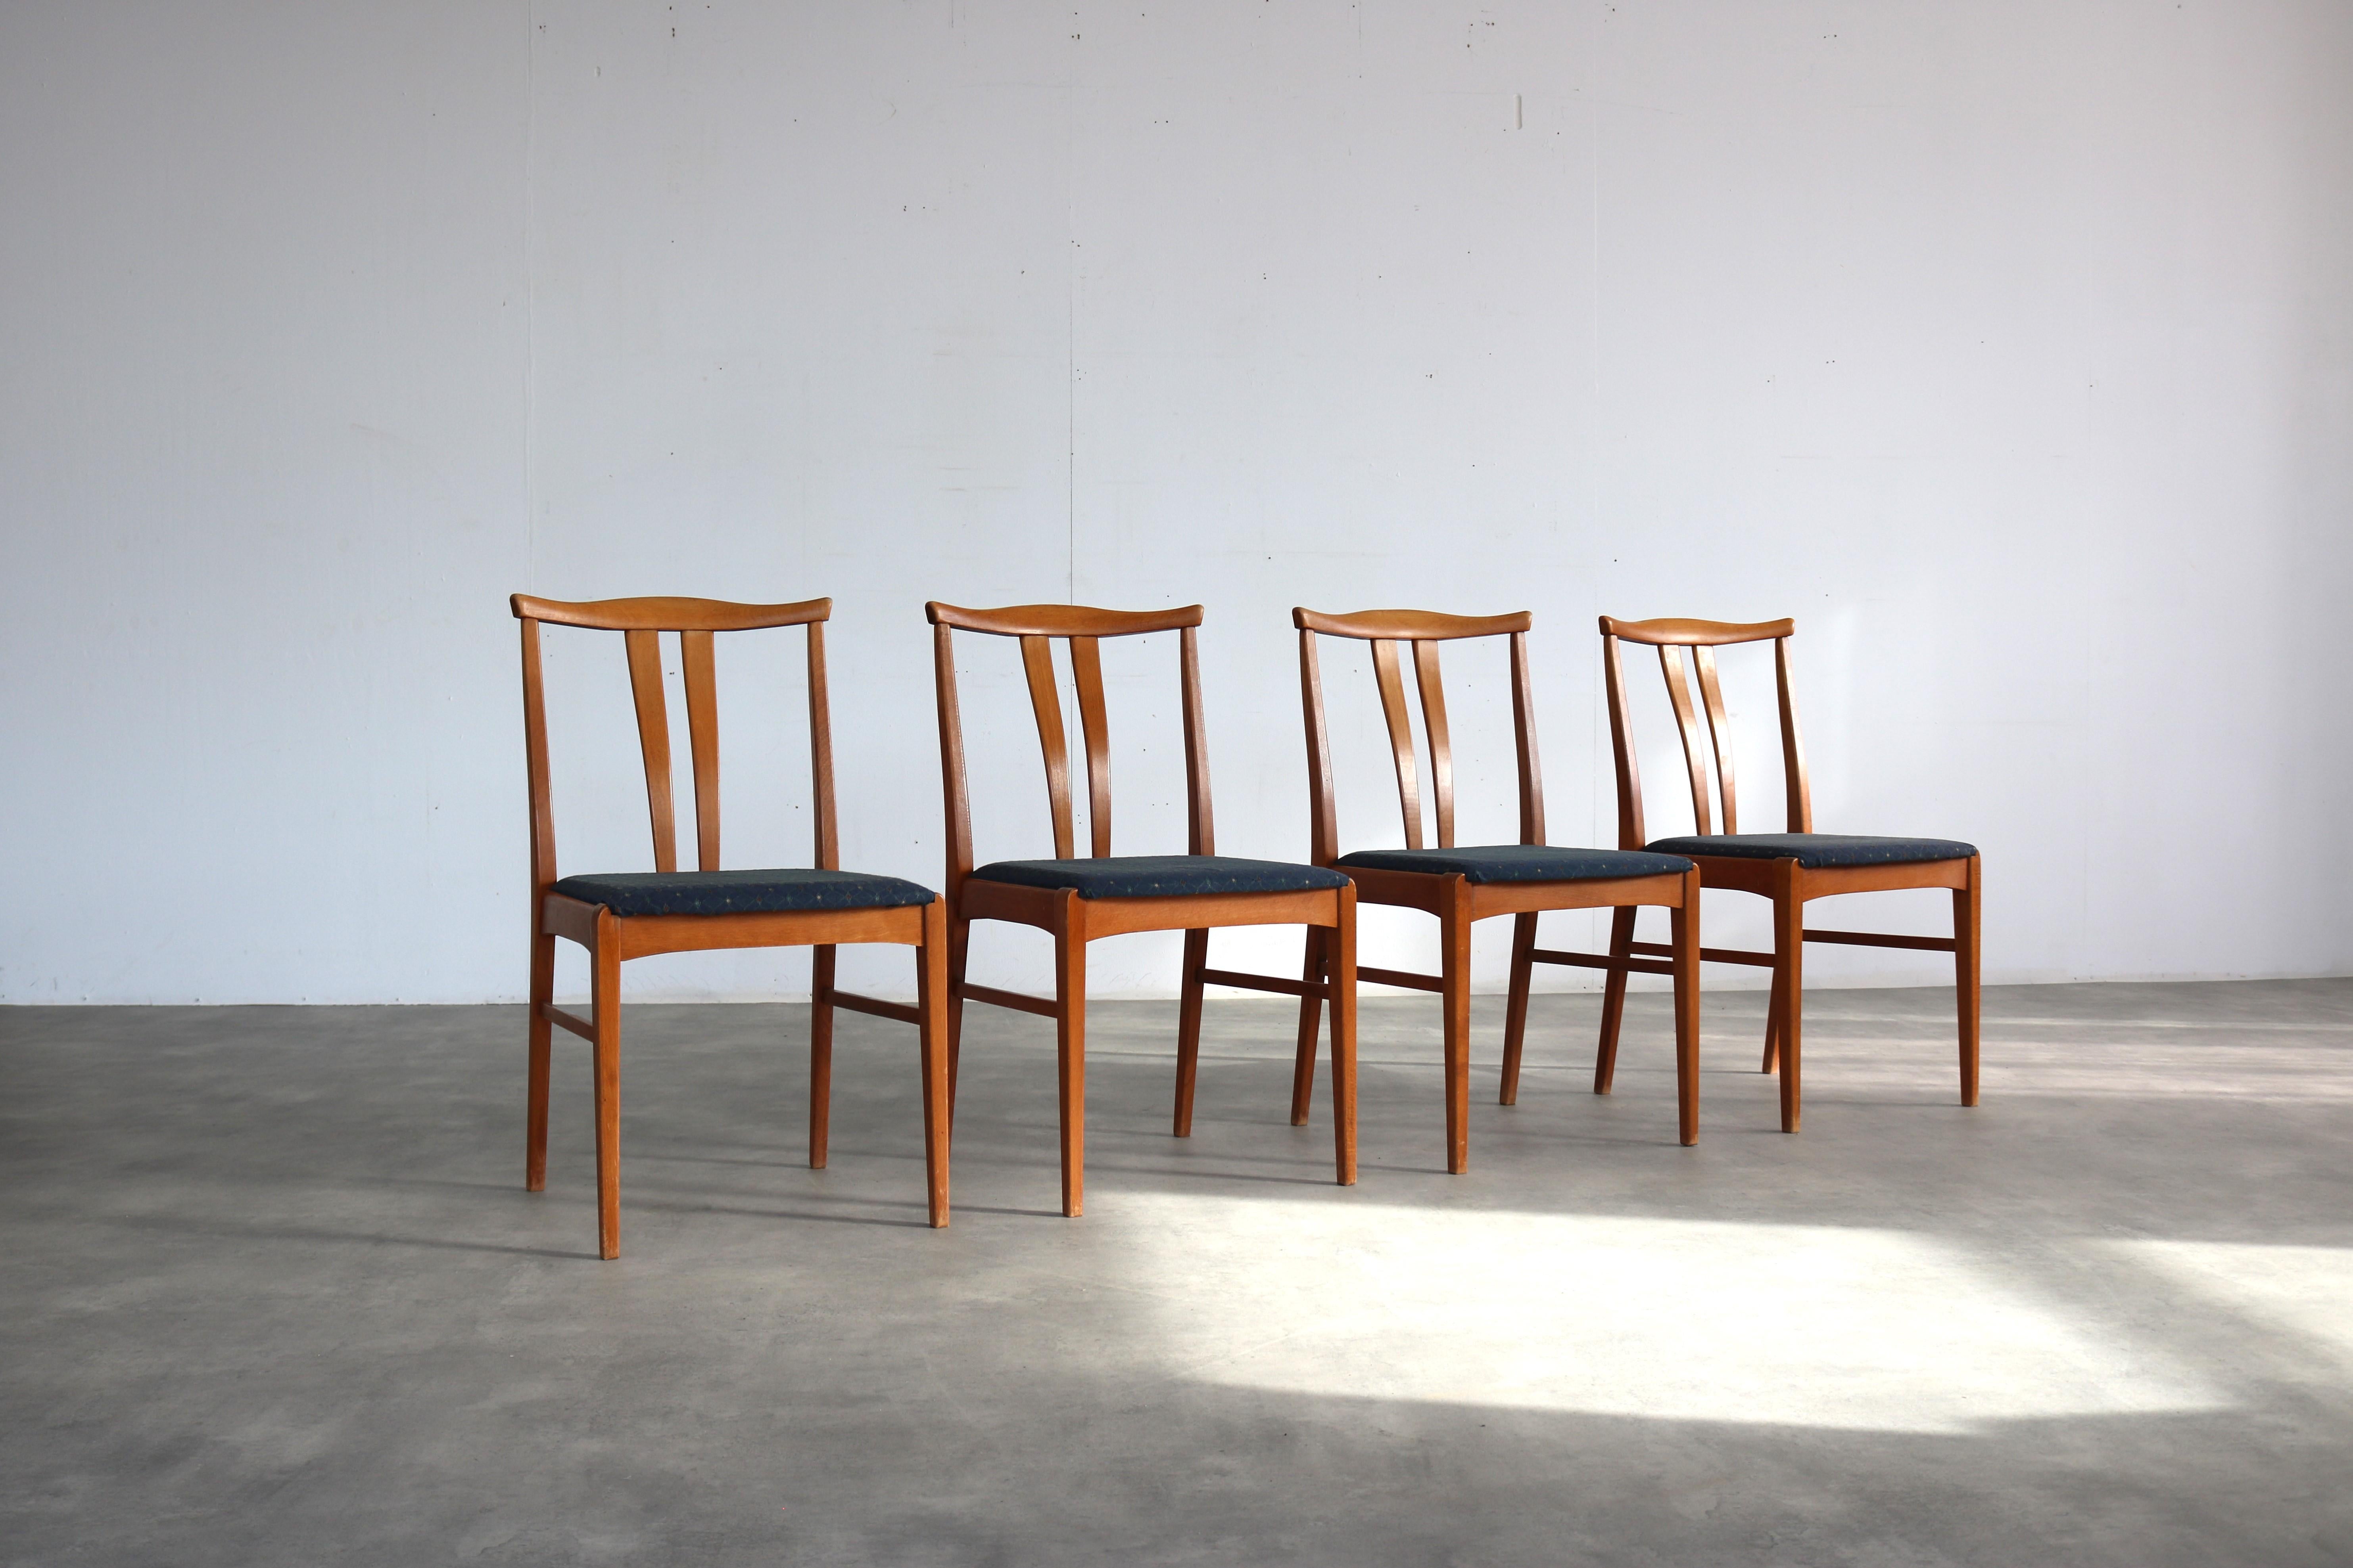 vintage dining room chairs  chairs  60s  Swedish

period  60's
design  unknown  Sweden
condition  good  light signs of use
size  82 x 46 x 50 (hxwxd) seat height 45 cm;

details  teak; upholstery; set of 4;

article number  2303